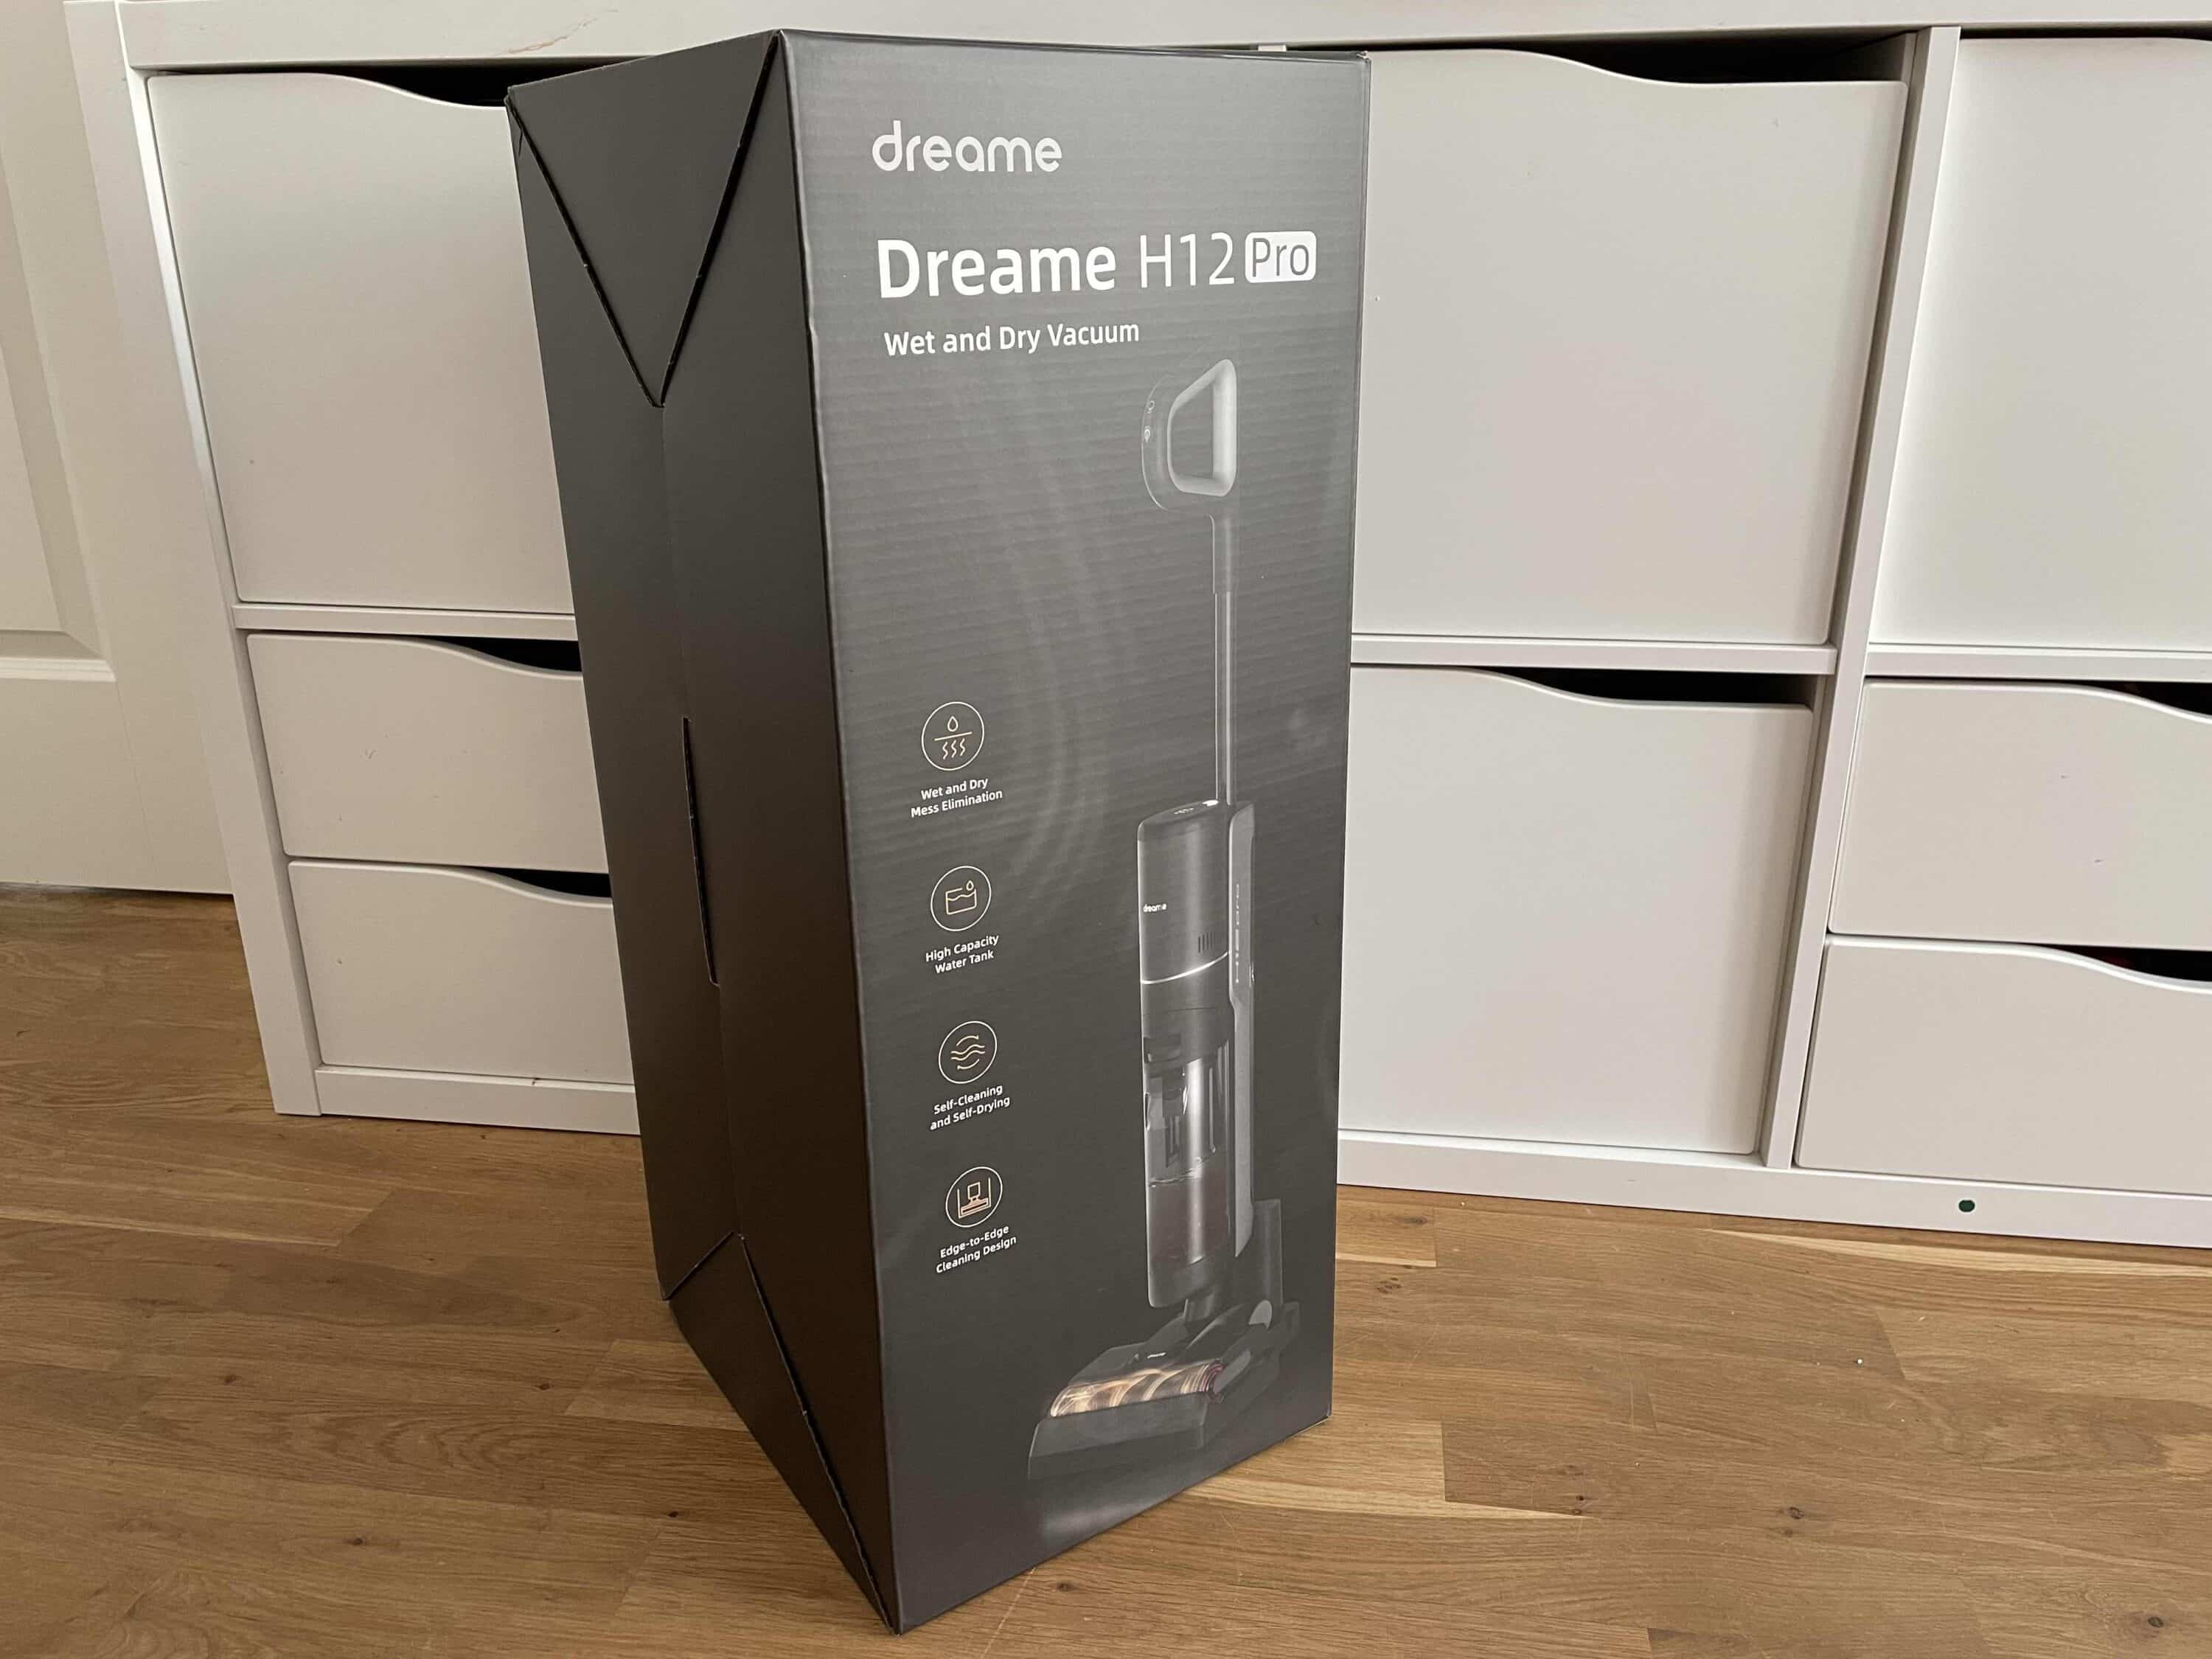 Dreame H12 Pro review: it really has EVERYTHING - GizChina.it